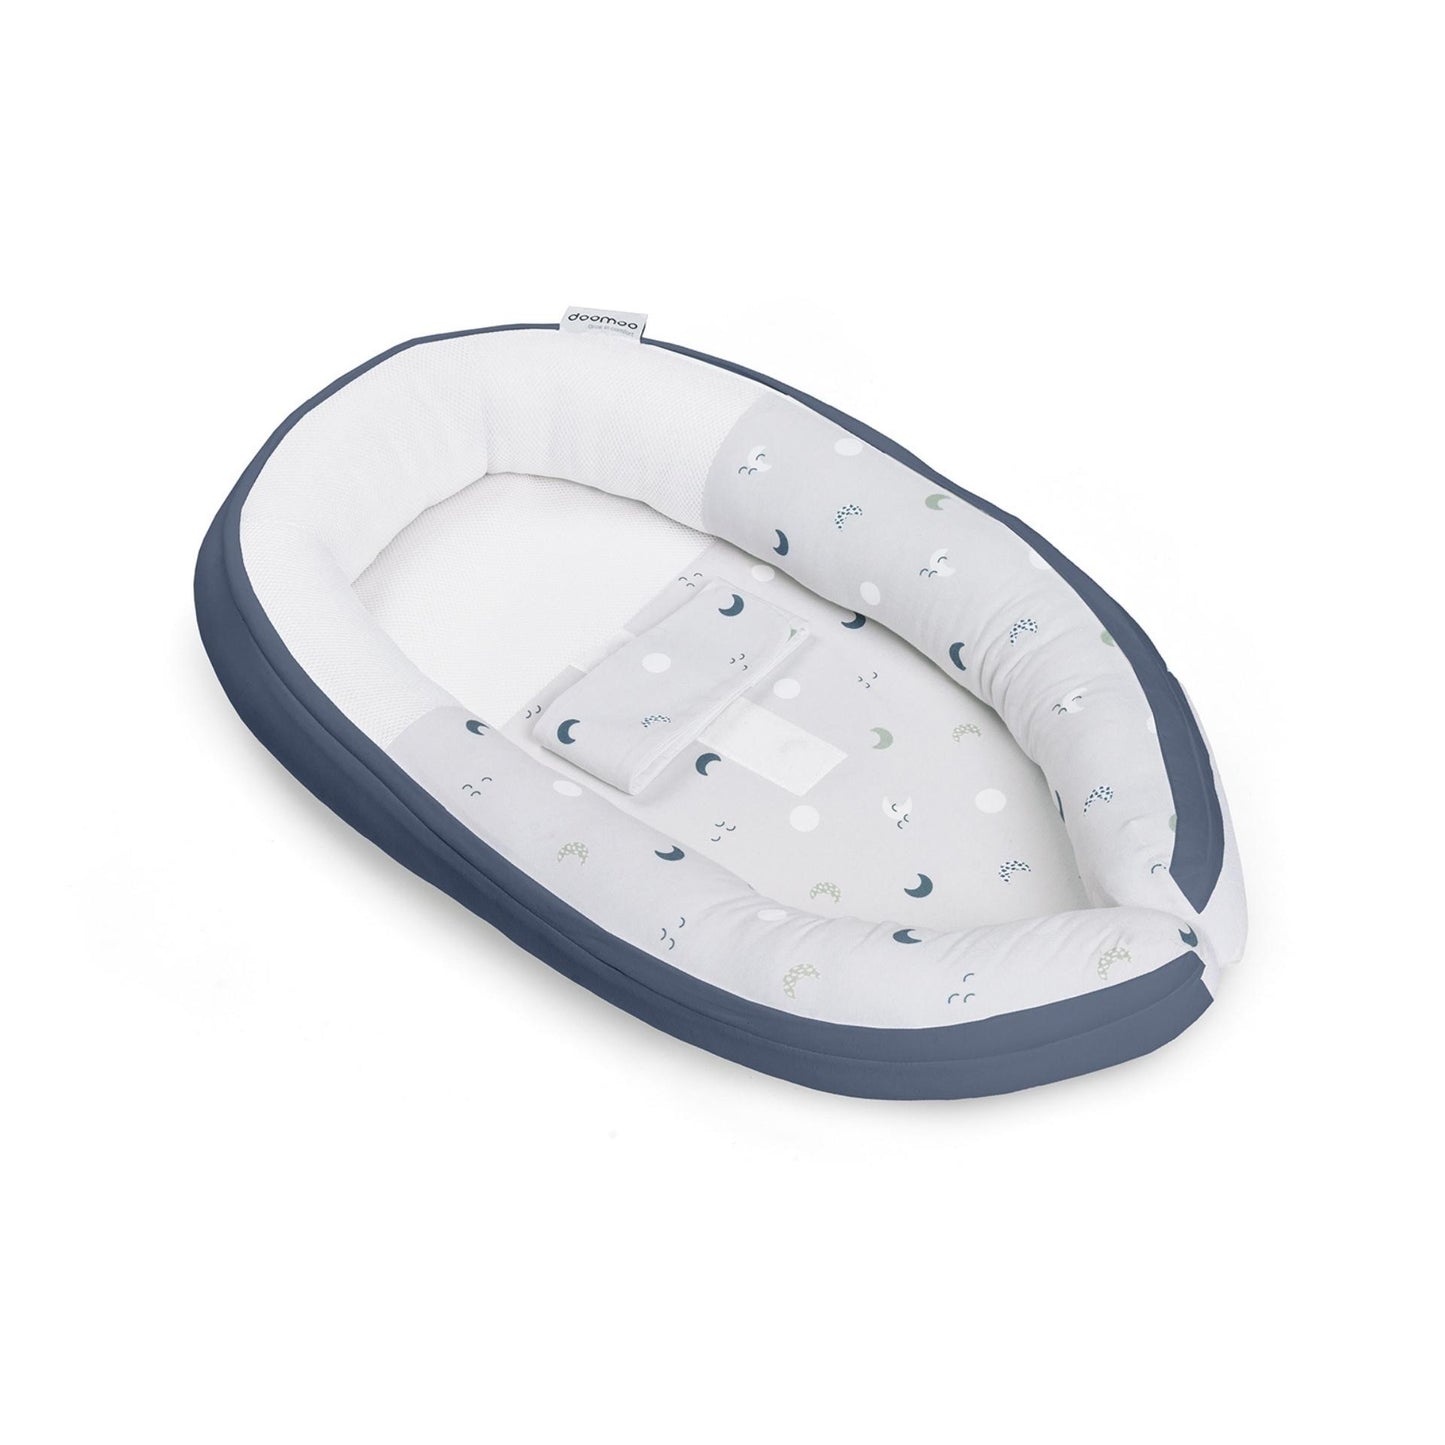 doomoo cocoon - safe and cocoon babynest - reassure the baby - Blue grey moon